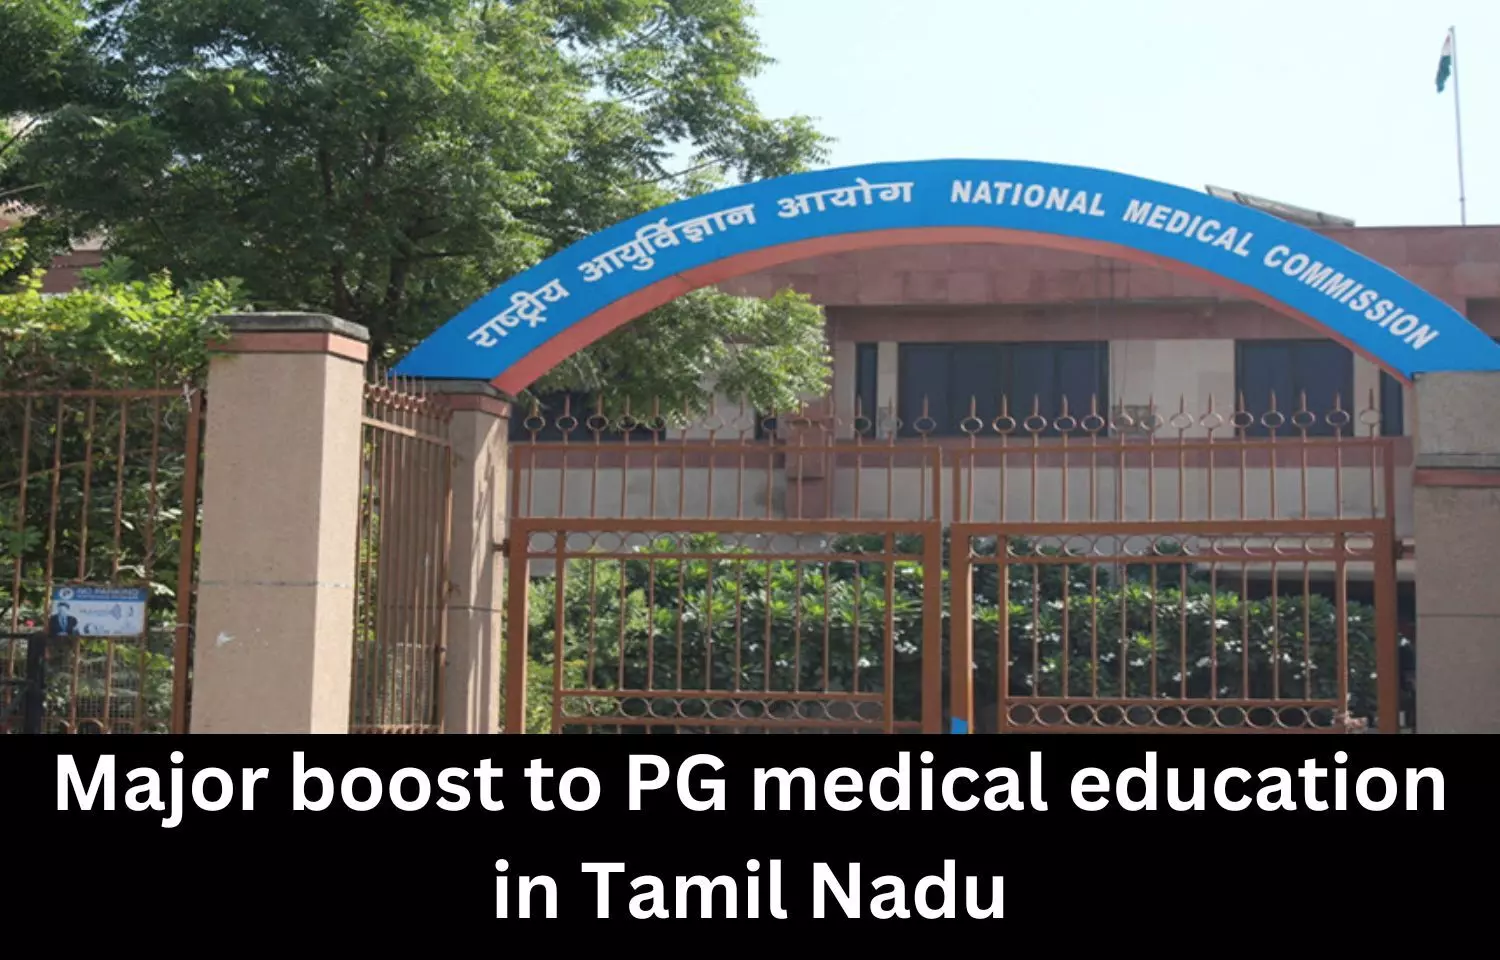 Major boost to PG medical education in Tamil Nadu: NMC nod for 88 PG, 14 SS seats